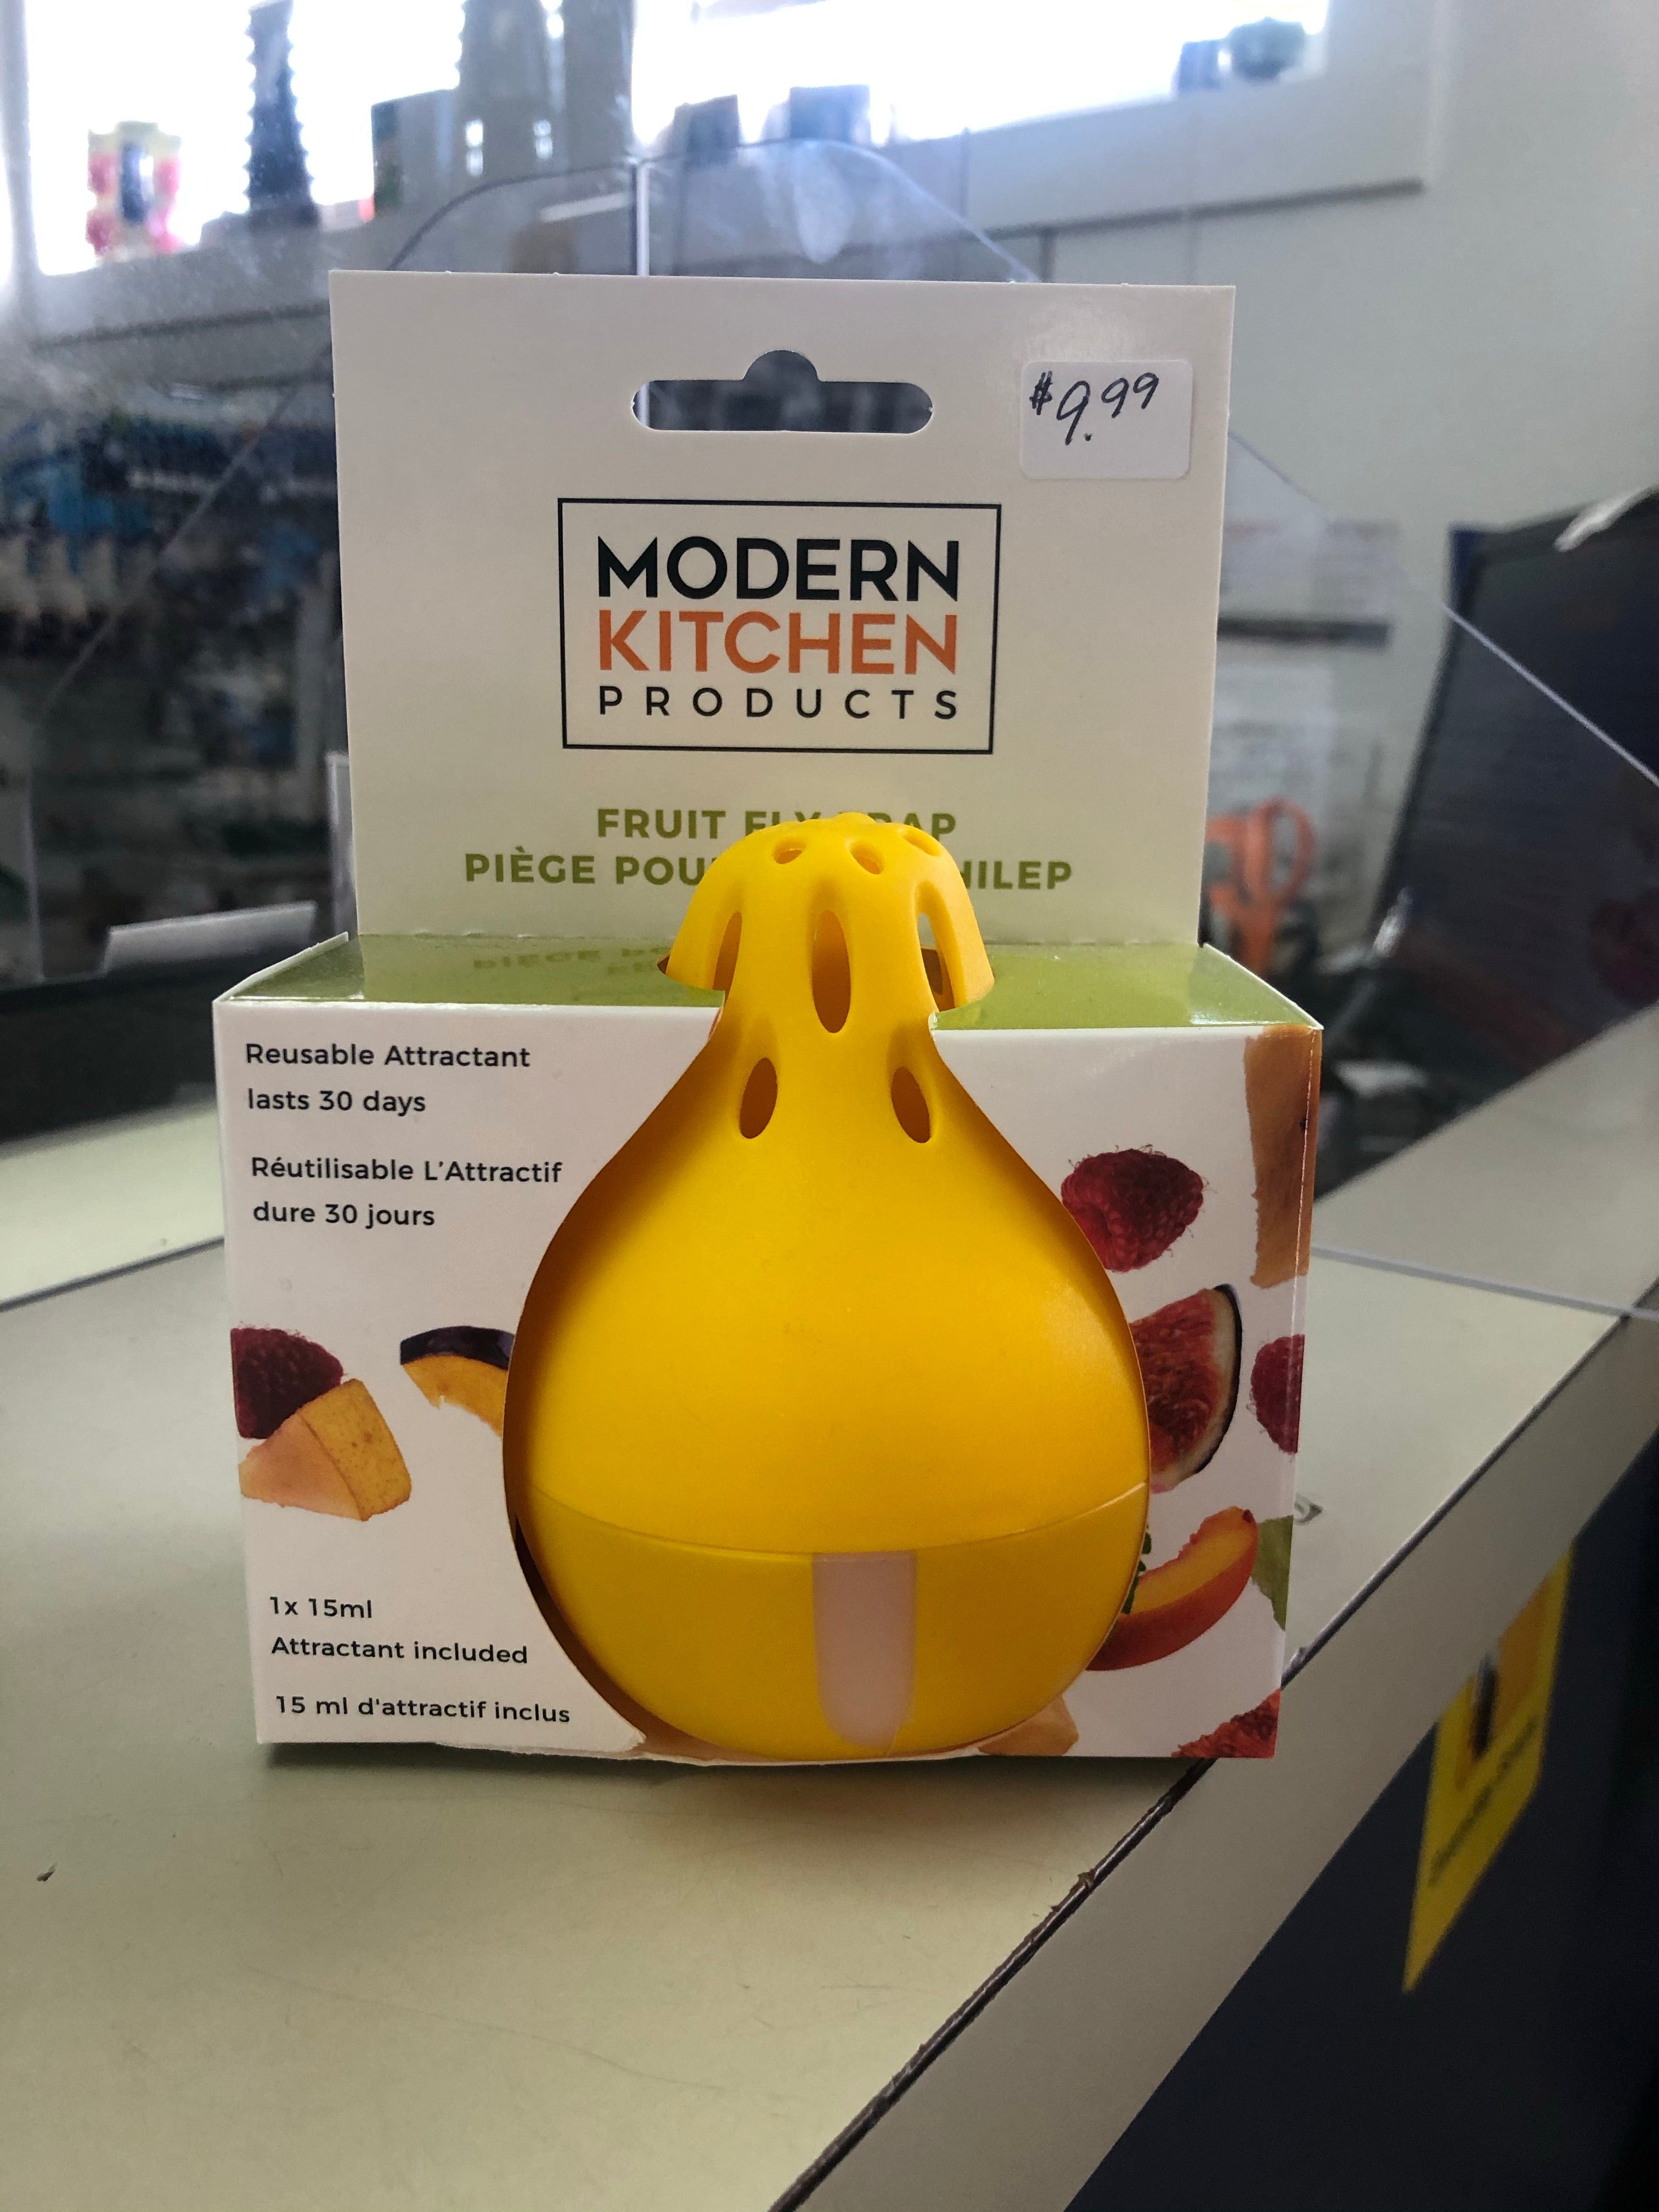 Modern Kitchen Fruit fly trap   SOLD OUT